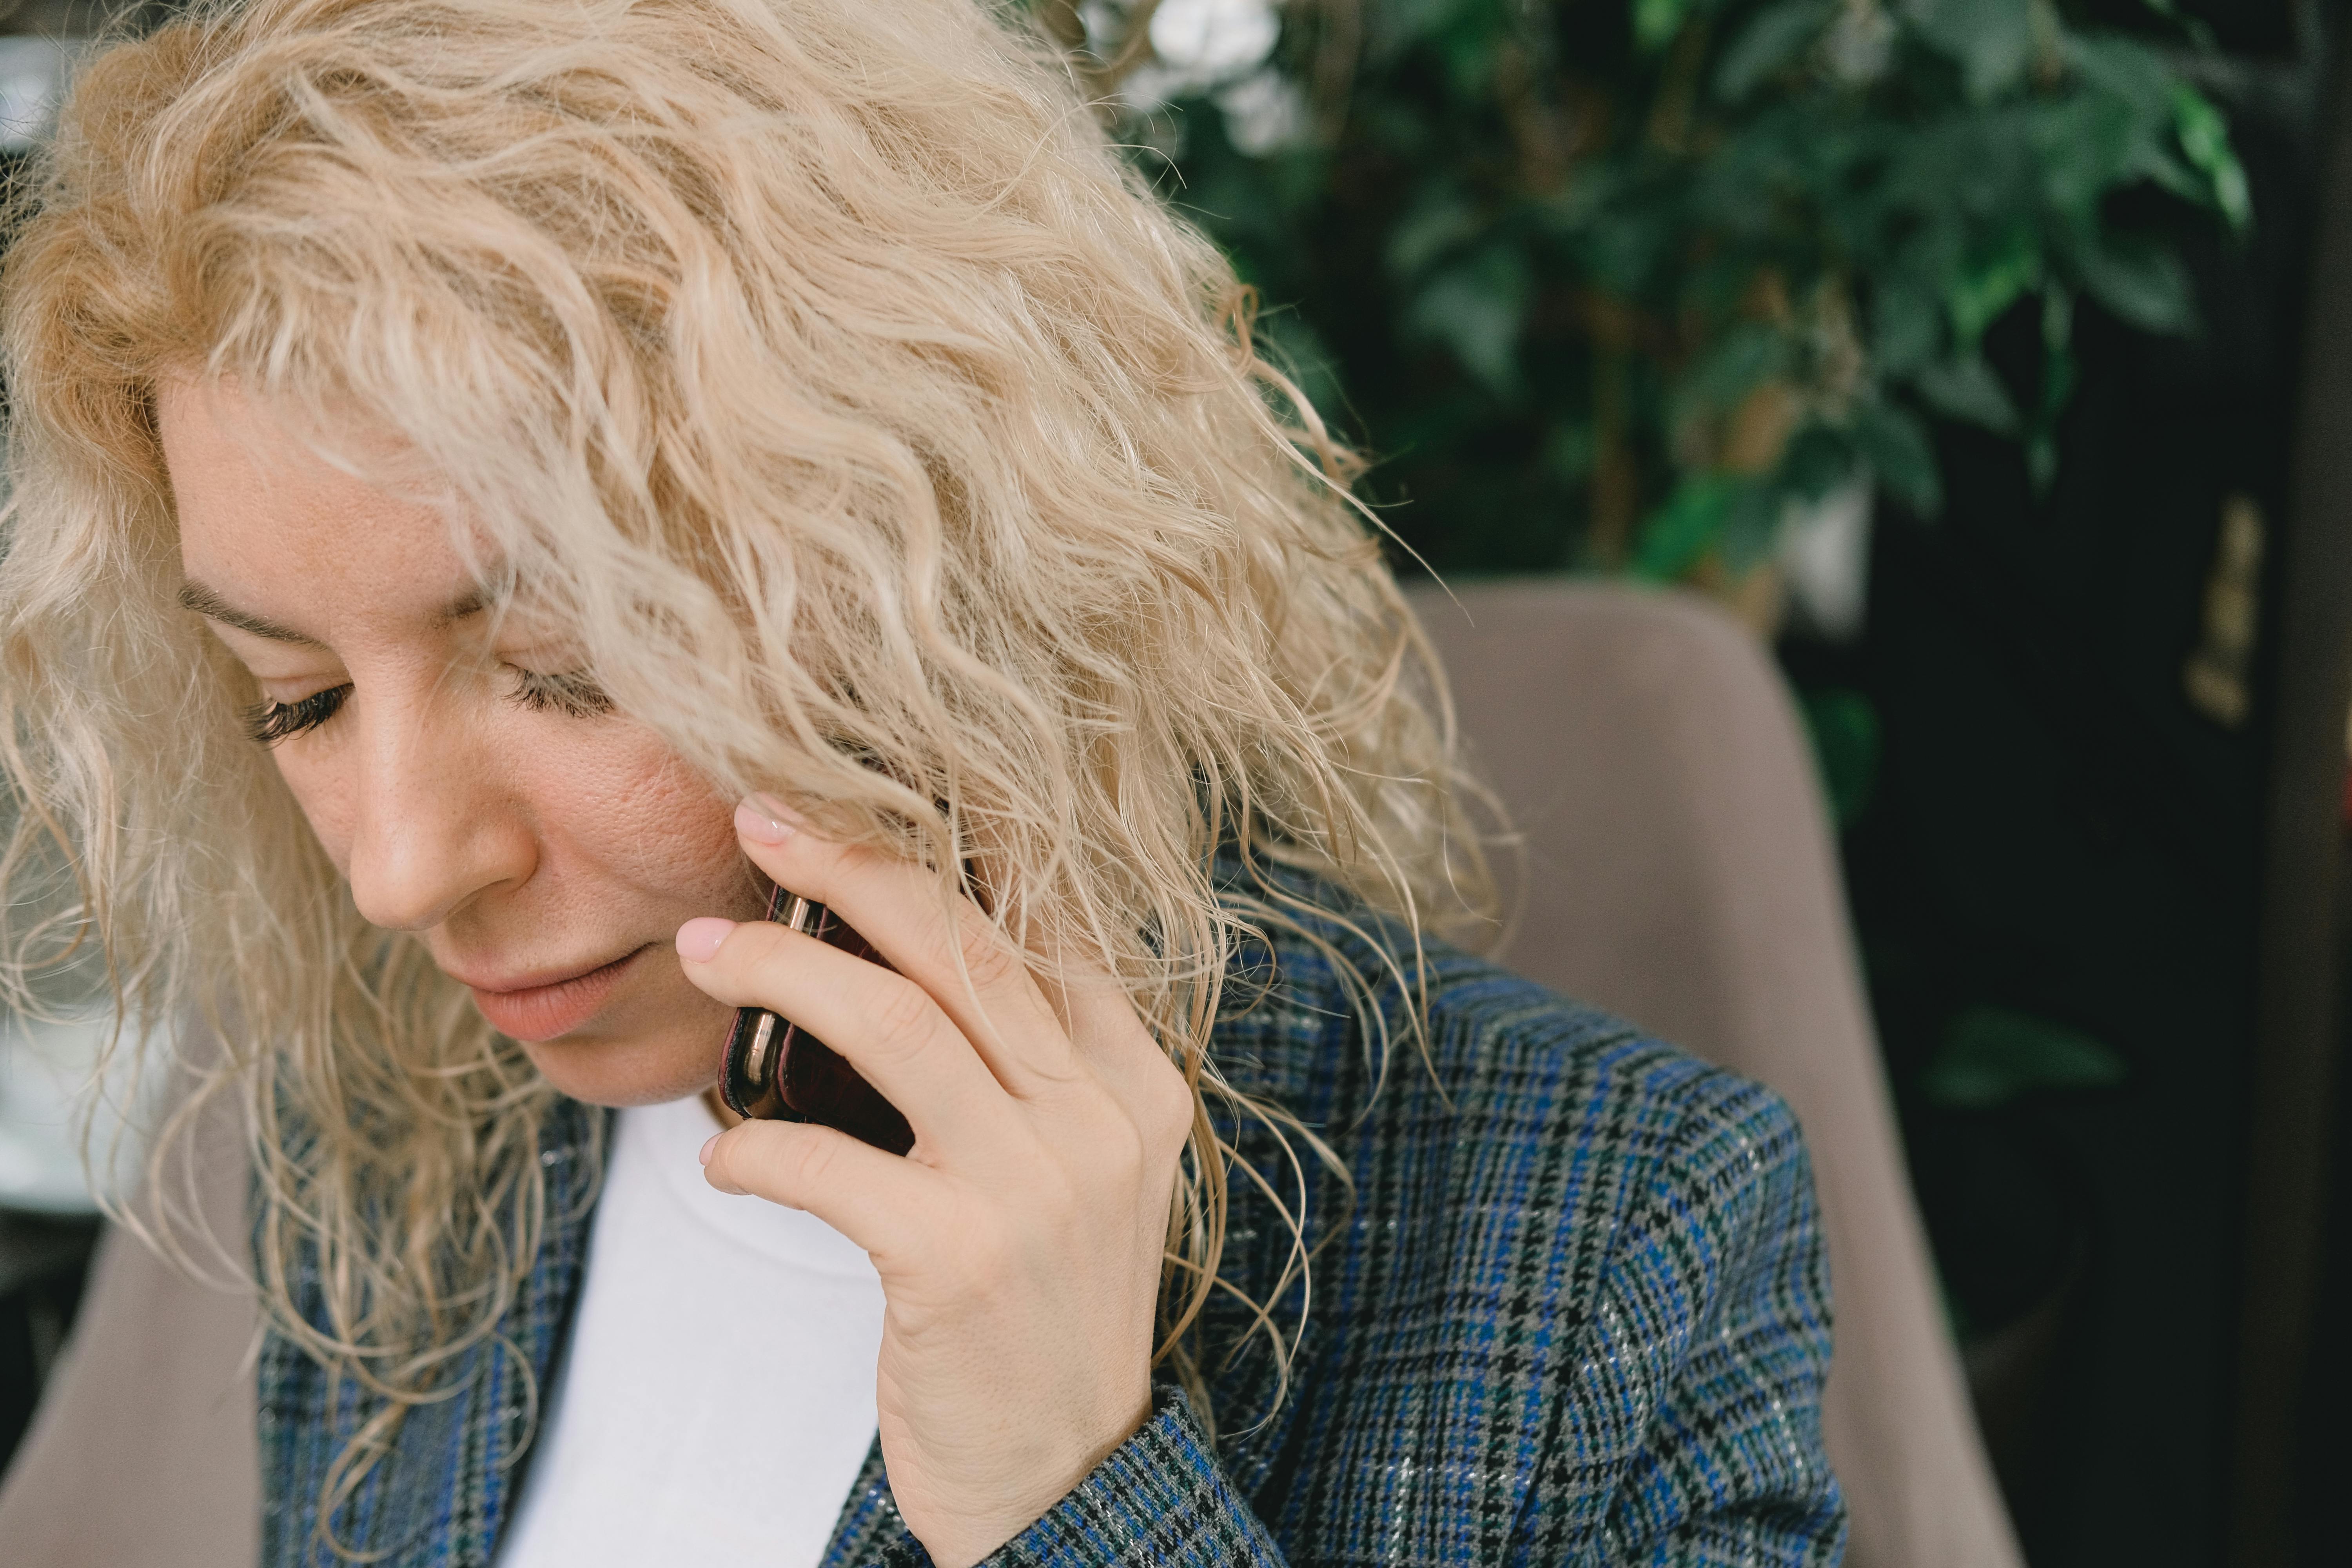 An emotional woman talking on the phone | Source: Pexels